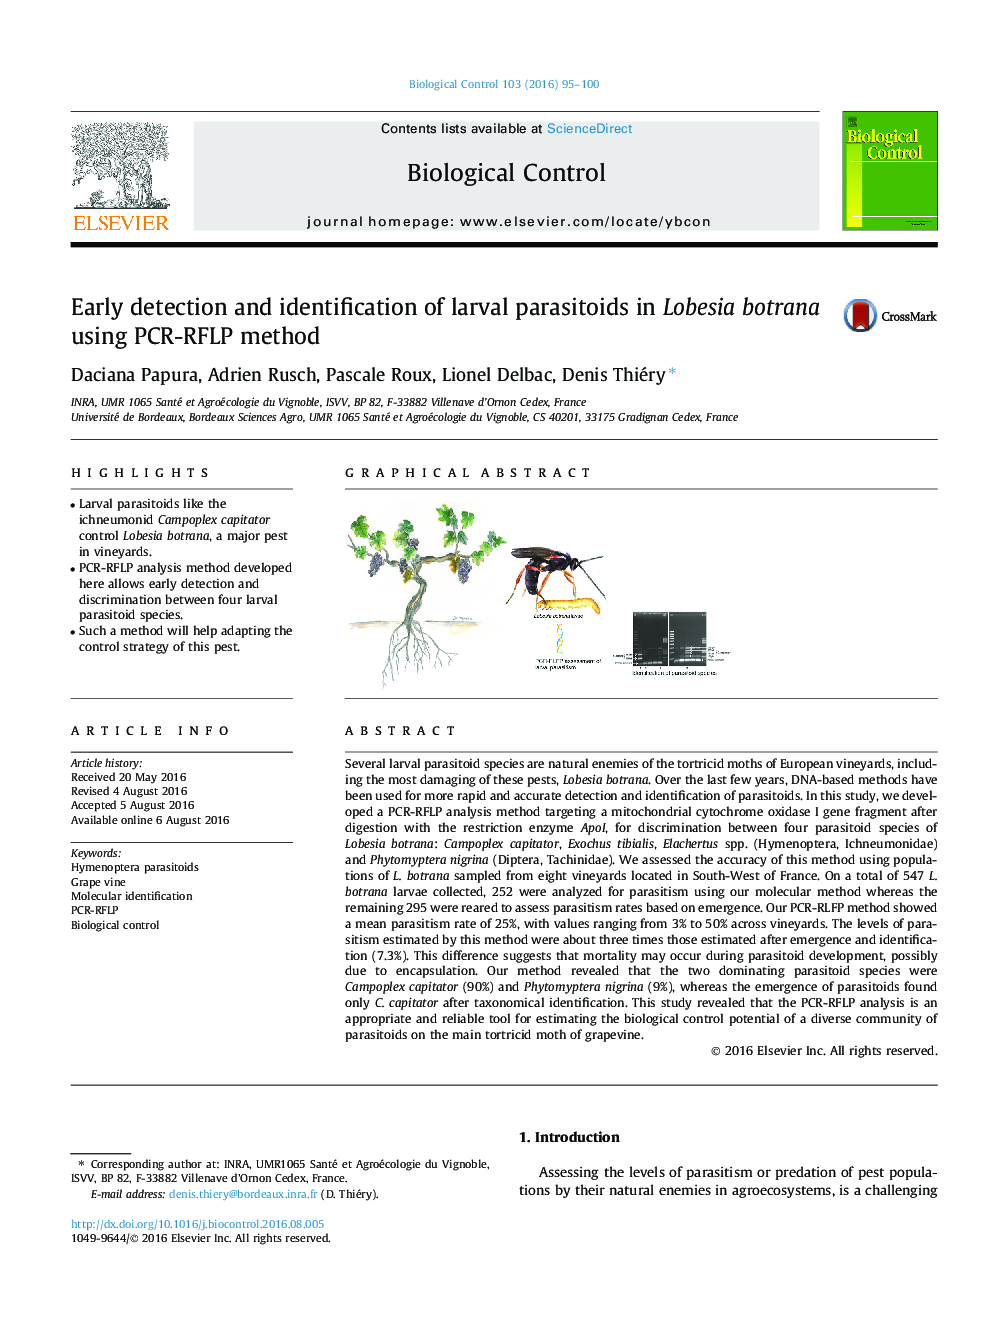 Early detection and identification of larval parasitoids in Lobesia botrana using PCR-RFLP method